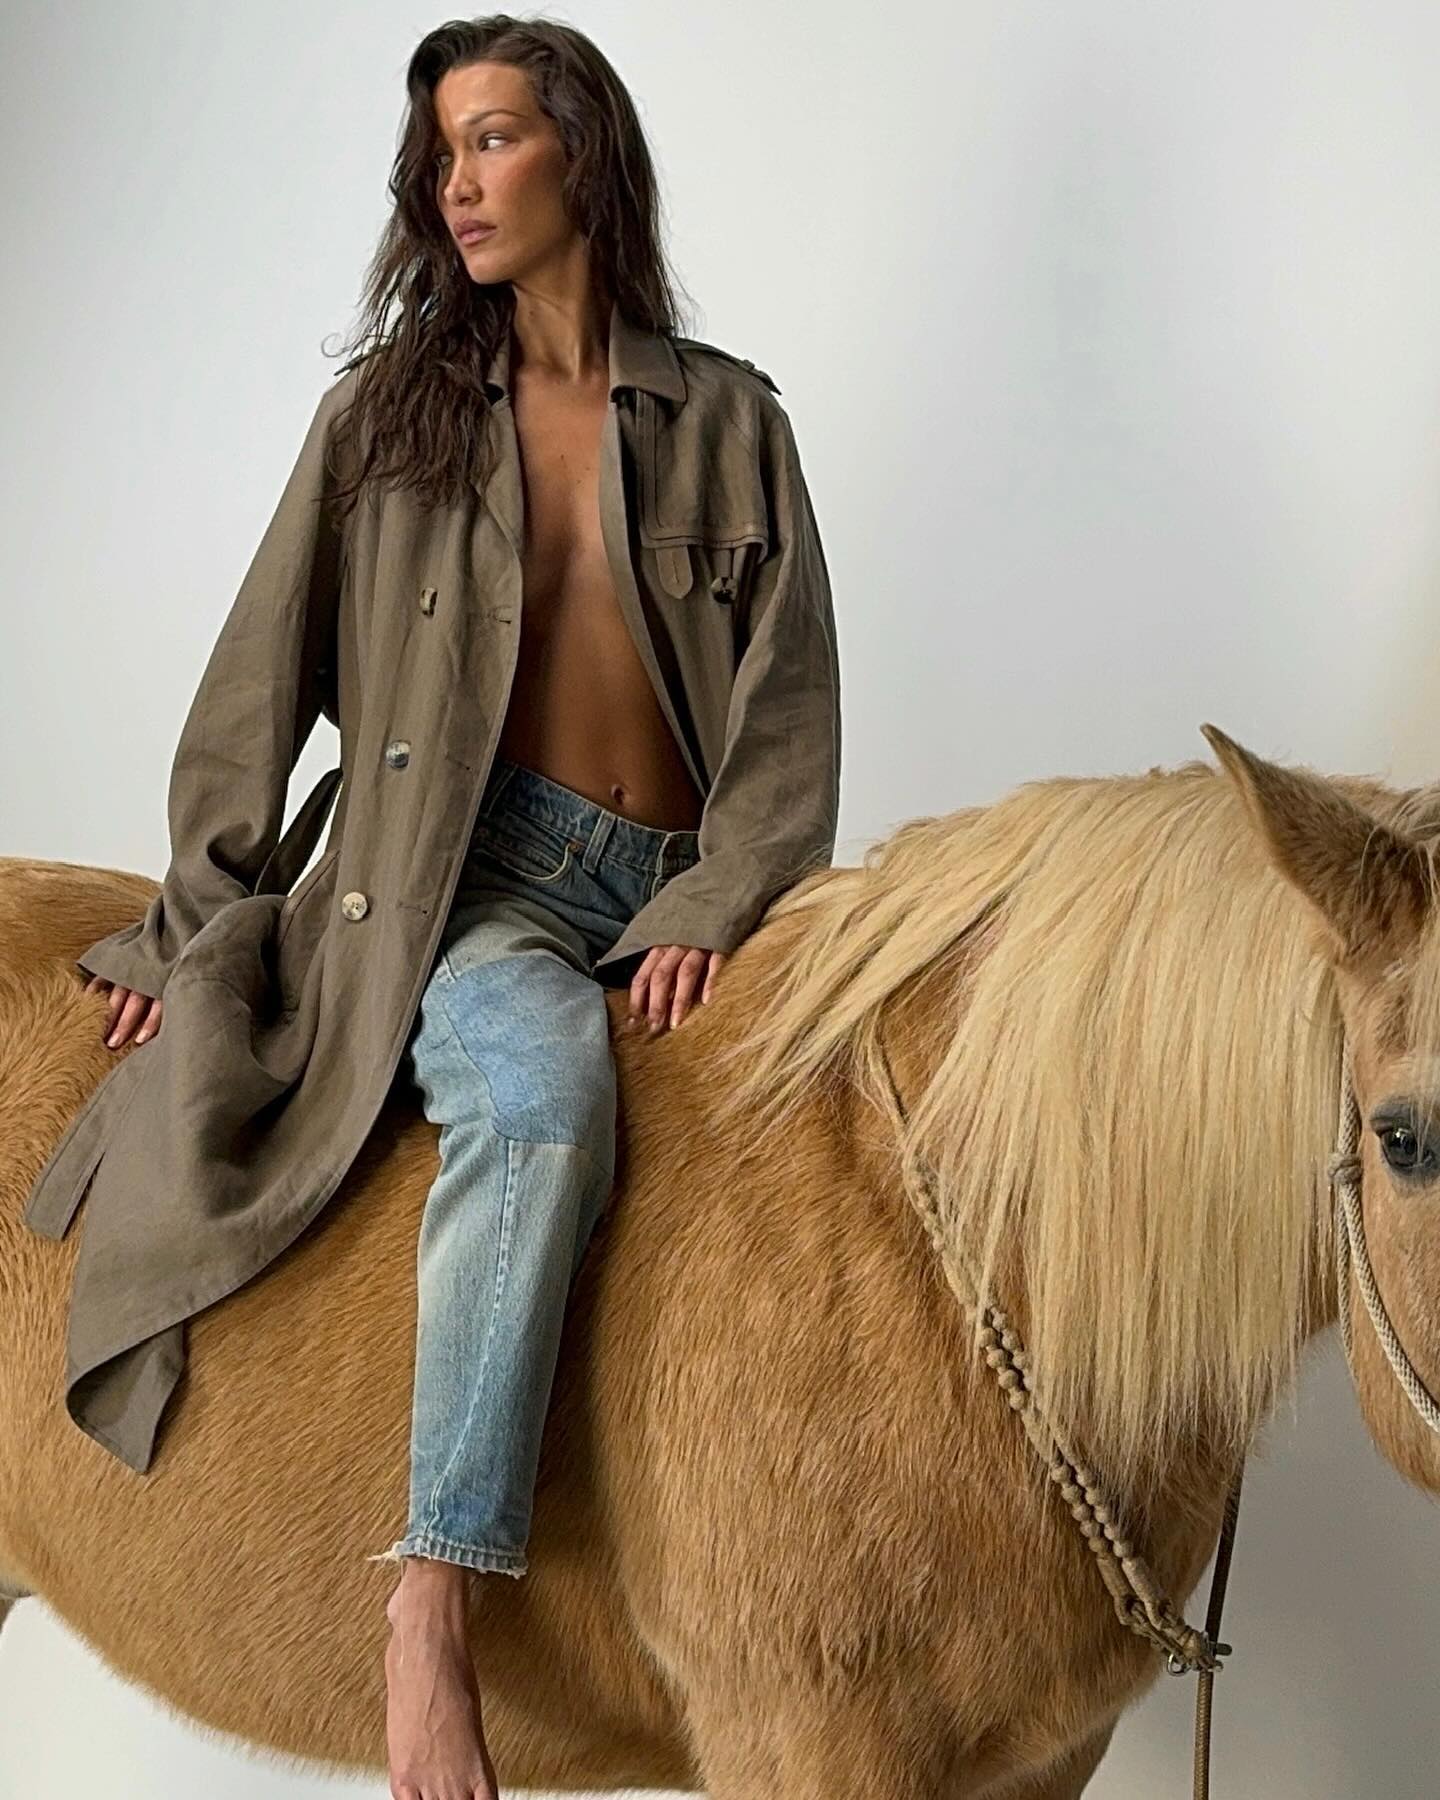 Photos n°6 : Bella Hadid is Horsing Around on the Set of Her New Vogue Shoot!